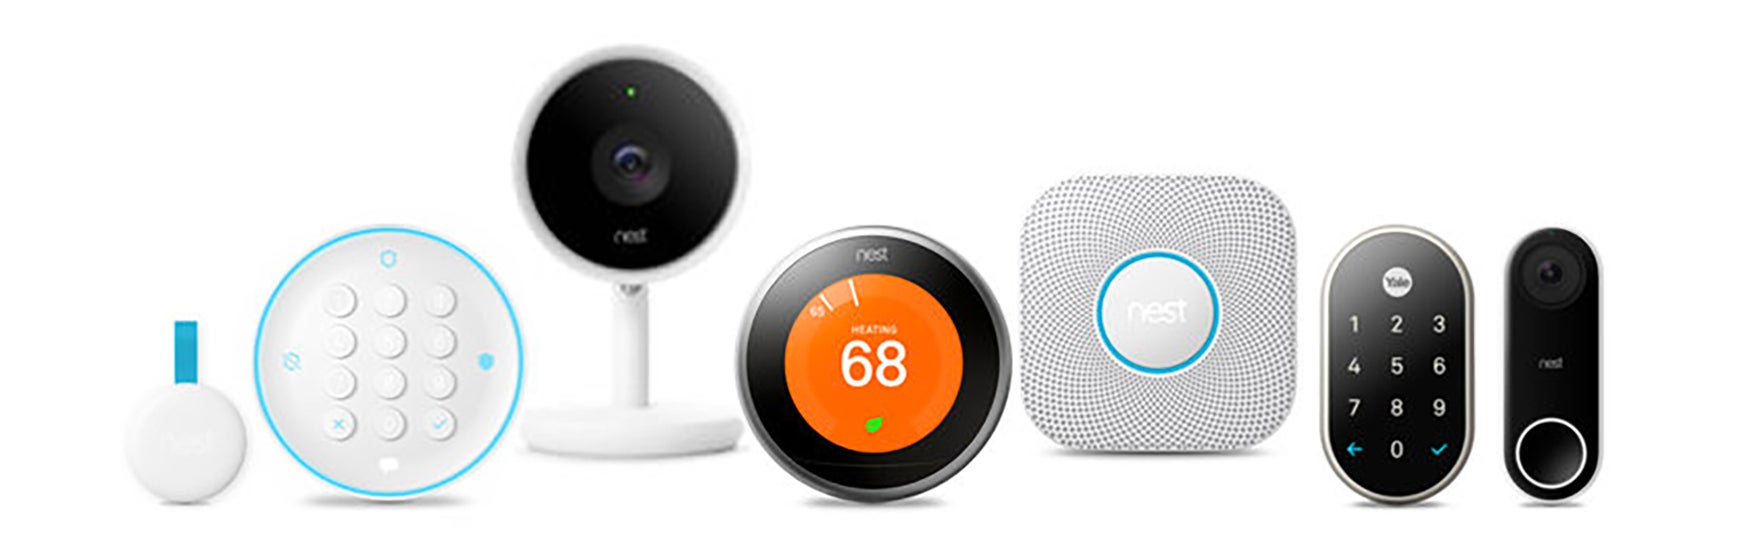 nest product giveaway